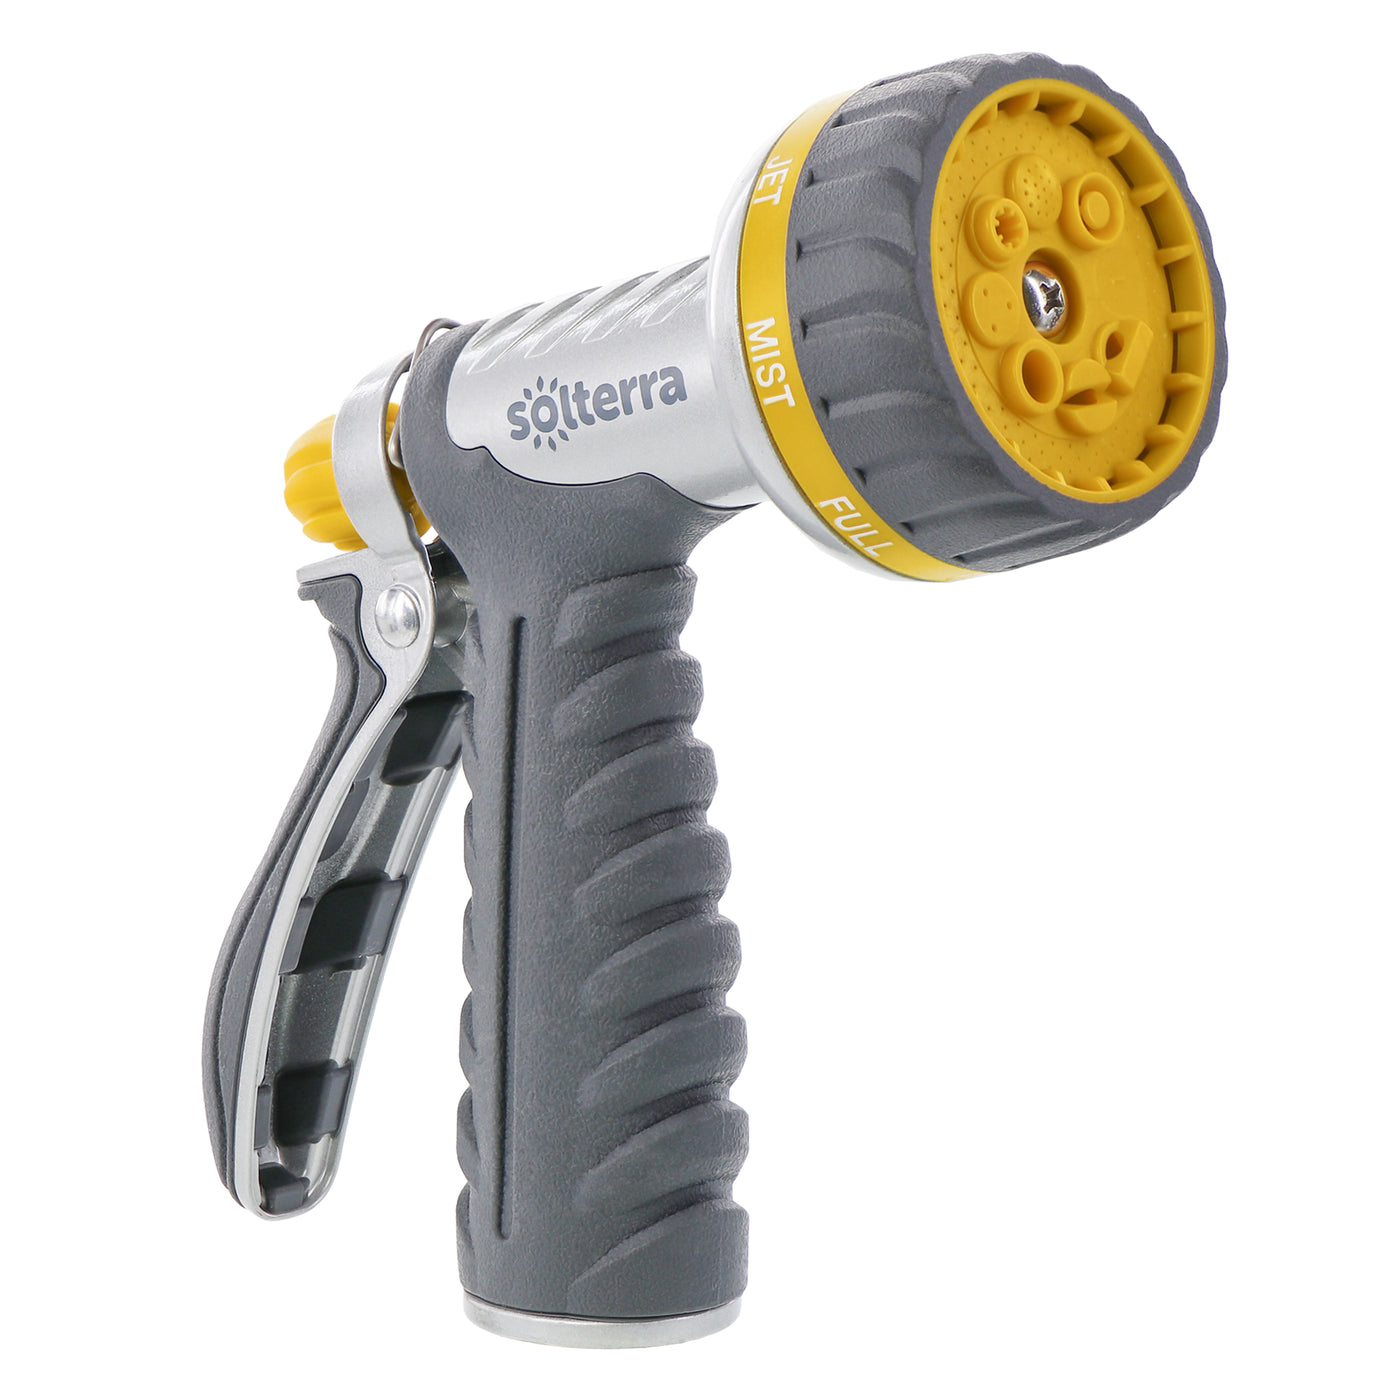 Gray, charcoal and yellow eight pattern garden hose nozzle with rear trigger. 